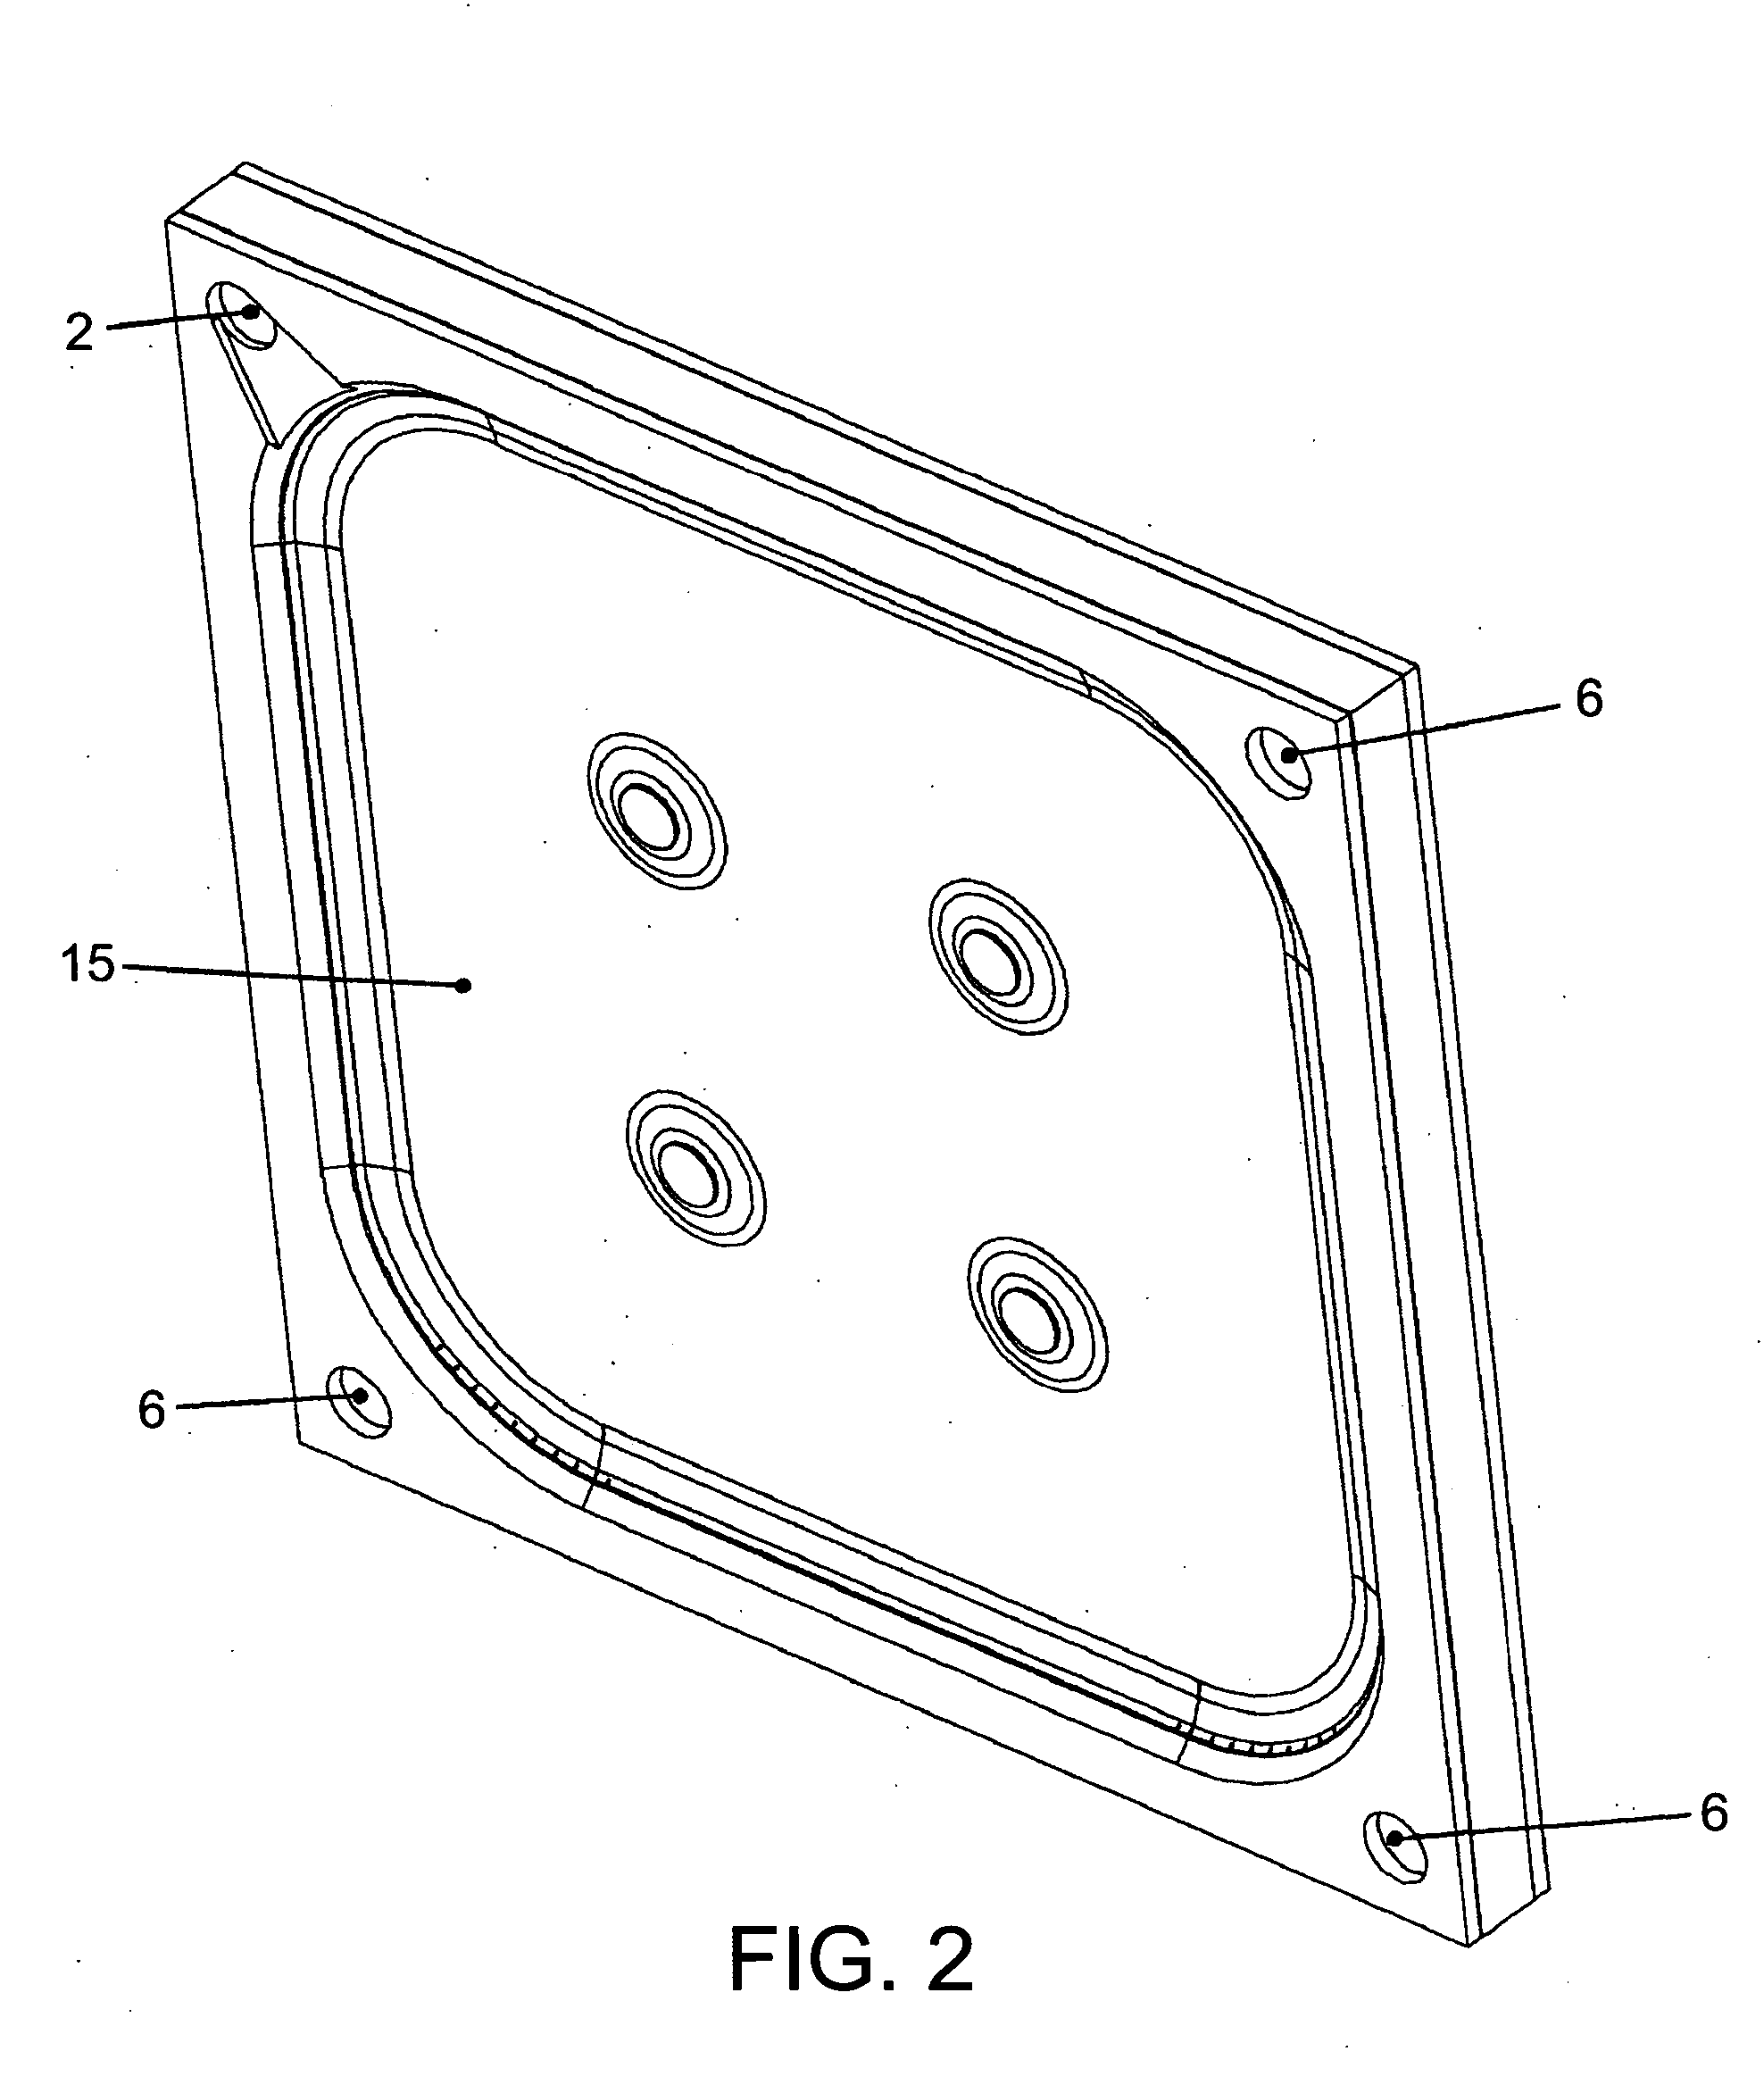 Filter plate assembly